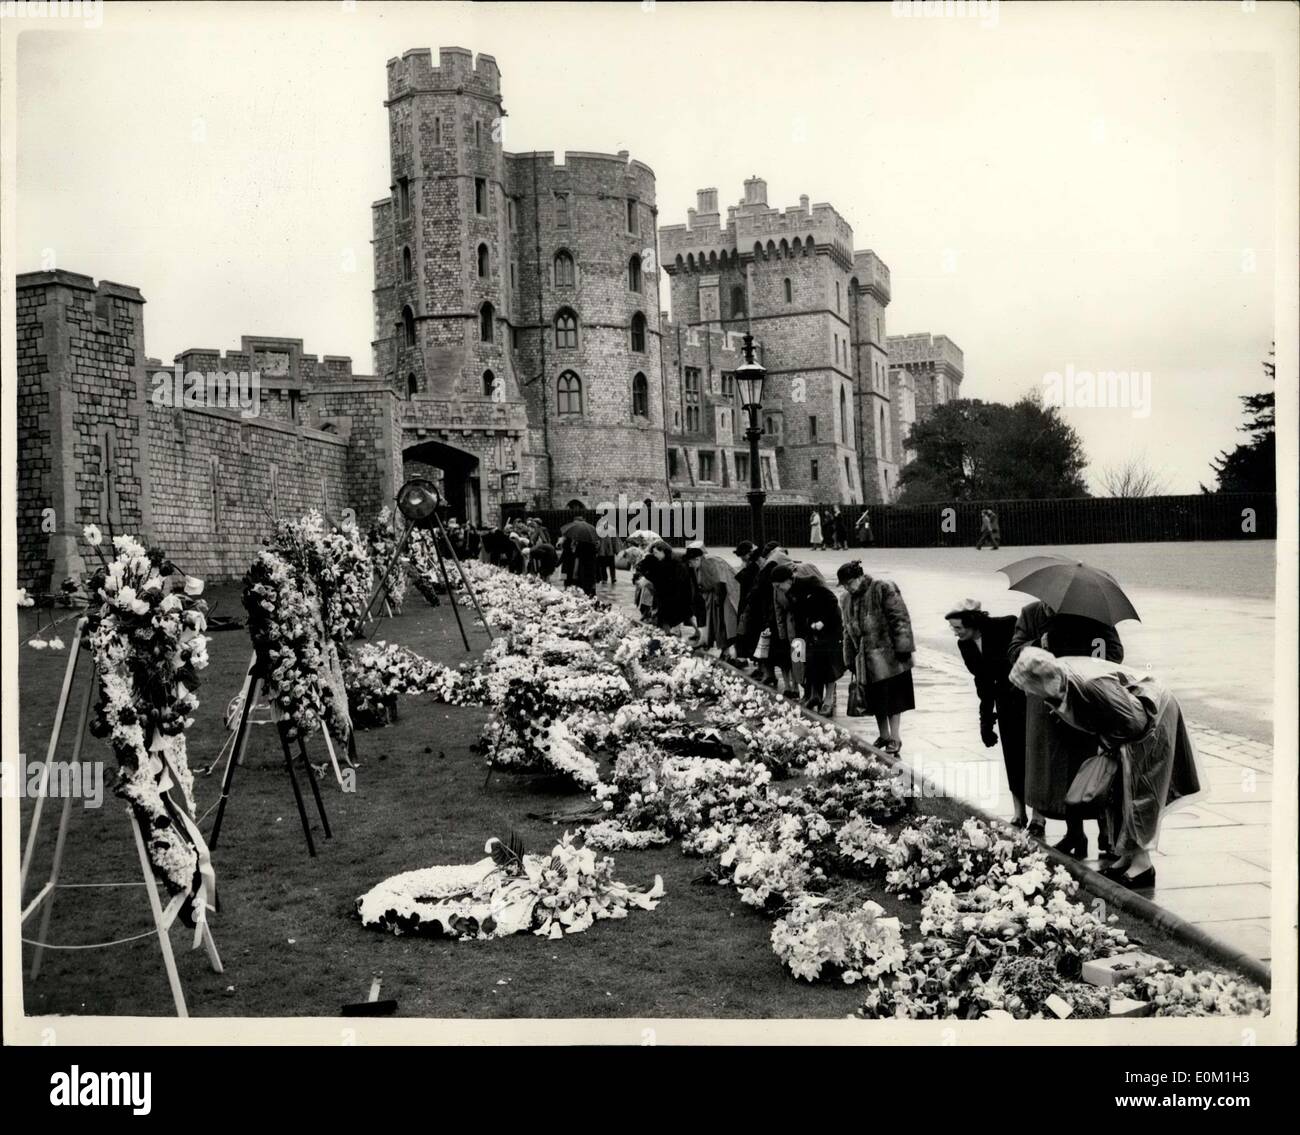 Apr. 01, 1953 - Windsor Castle Grounds Open to the Public. Queen Mary's Wreaths on show. Photo shows General view as the public Stock Photo